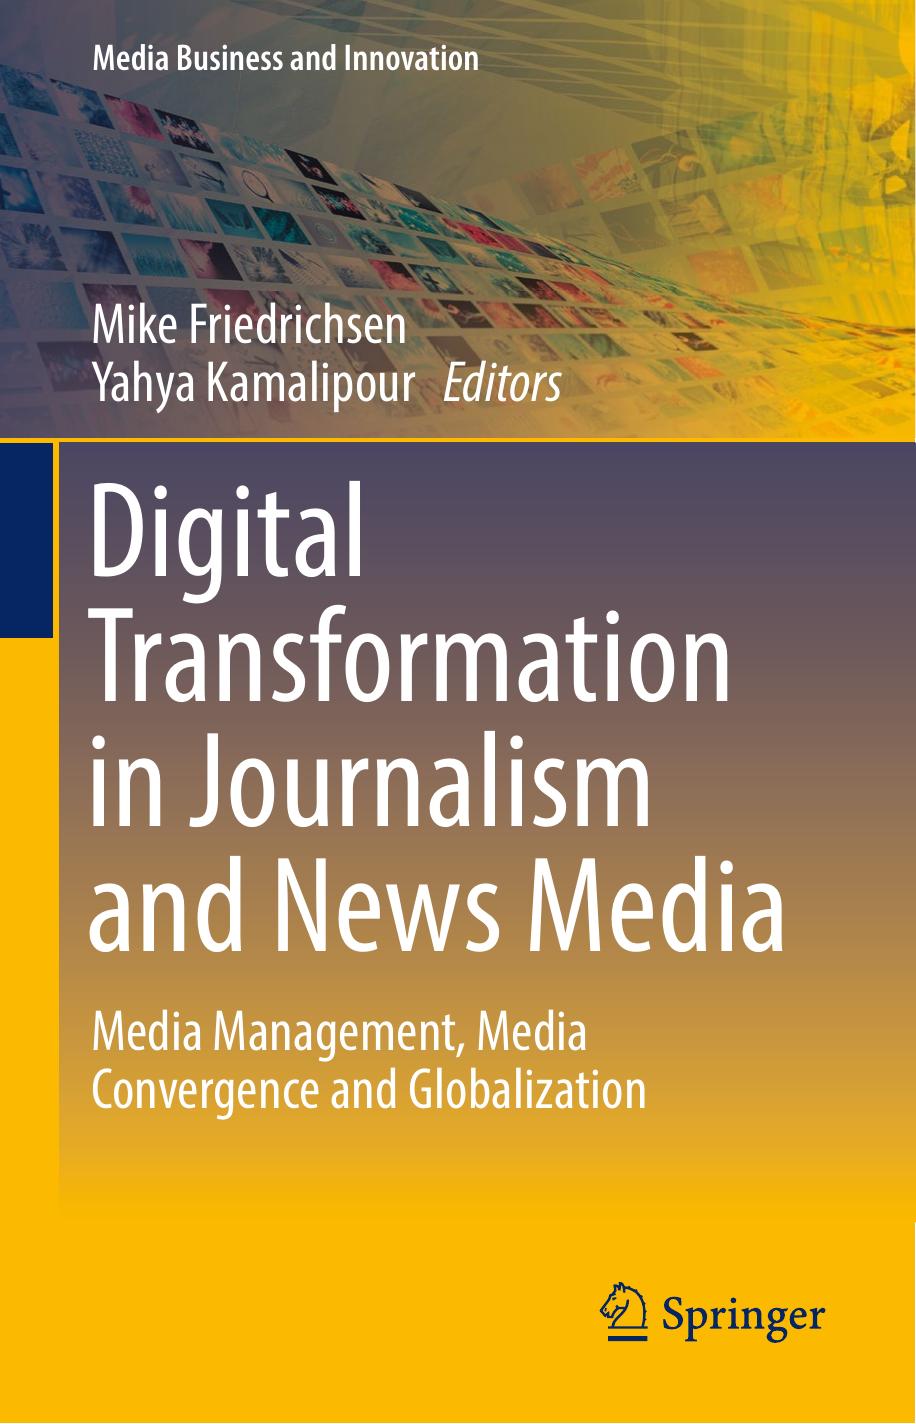 Digital Transformation in Journalism and News Media. Media Management, Media Convergence and Globalization 2016